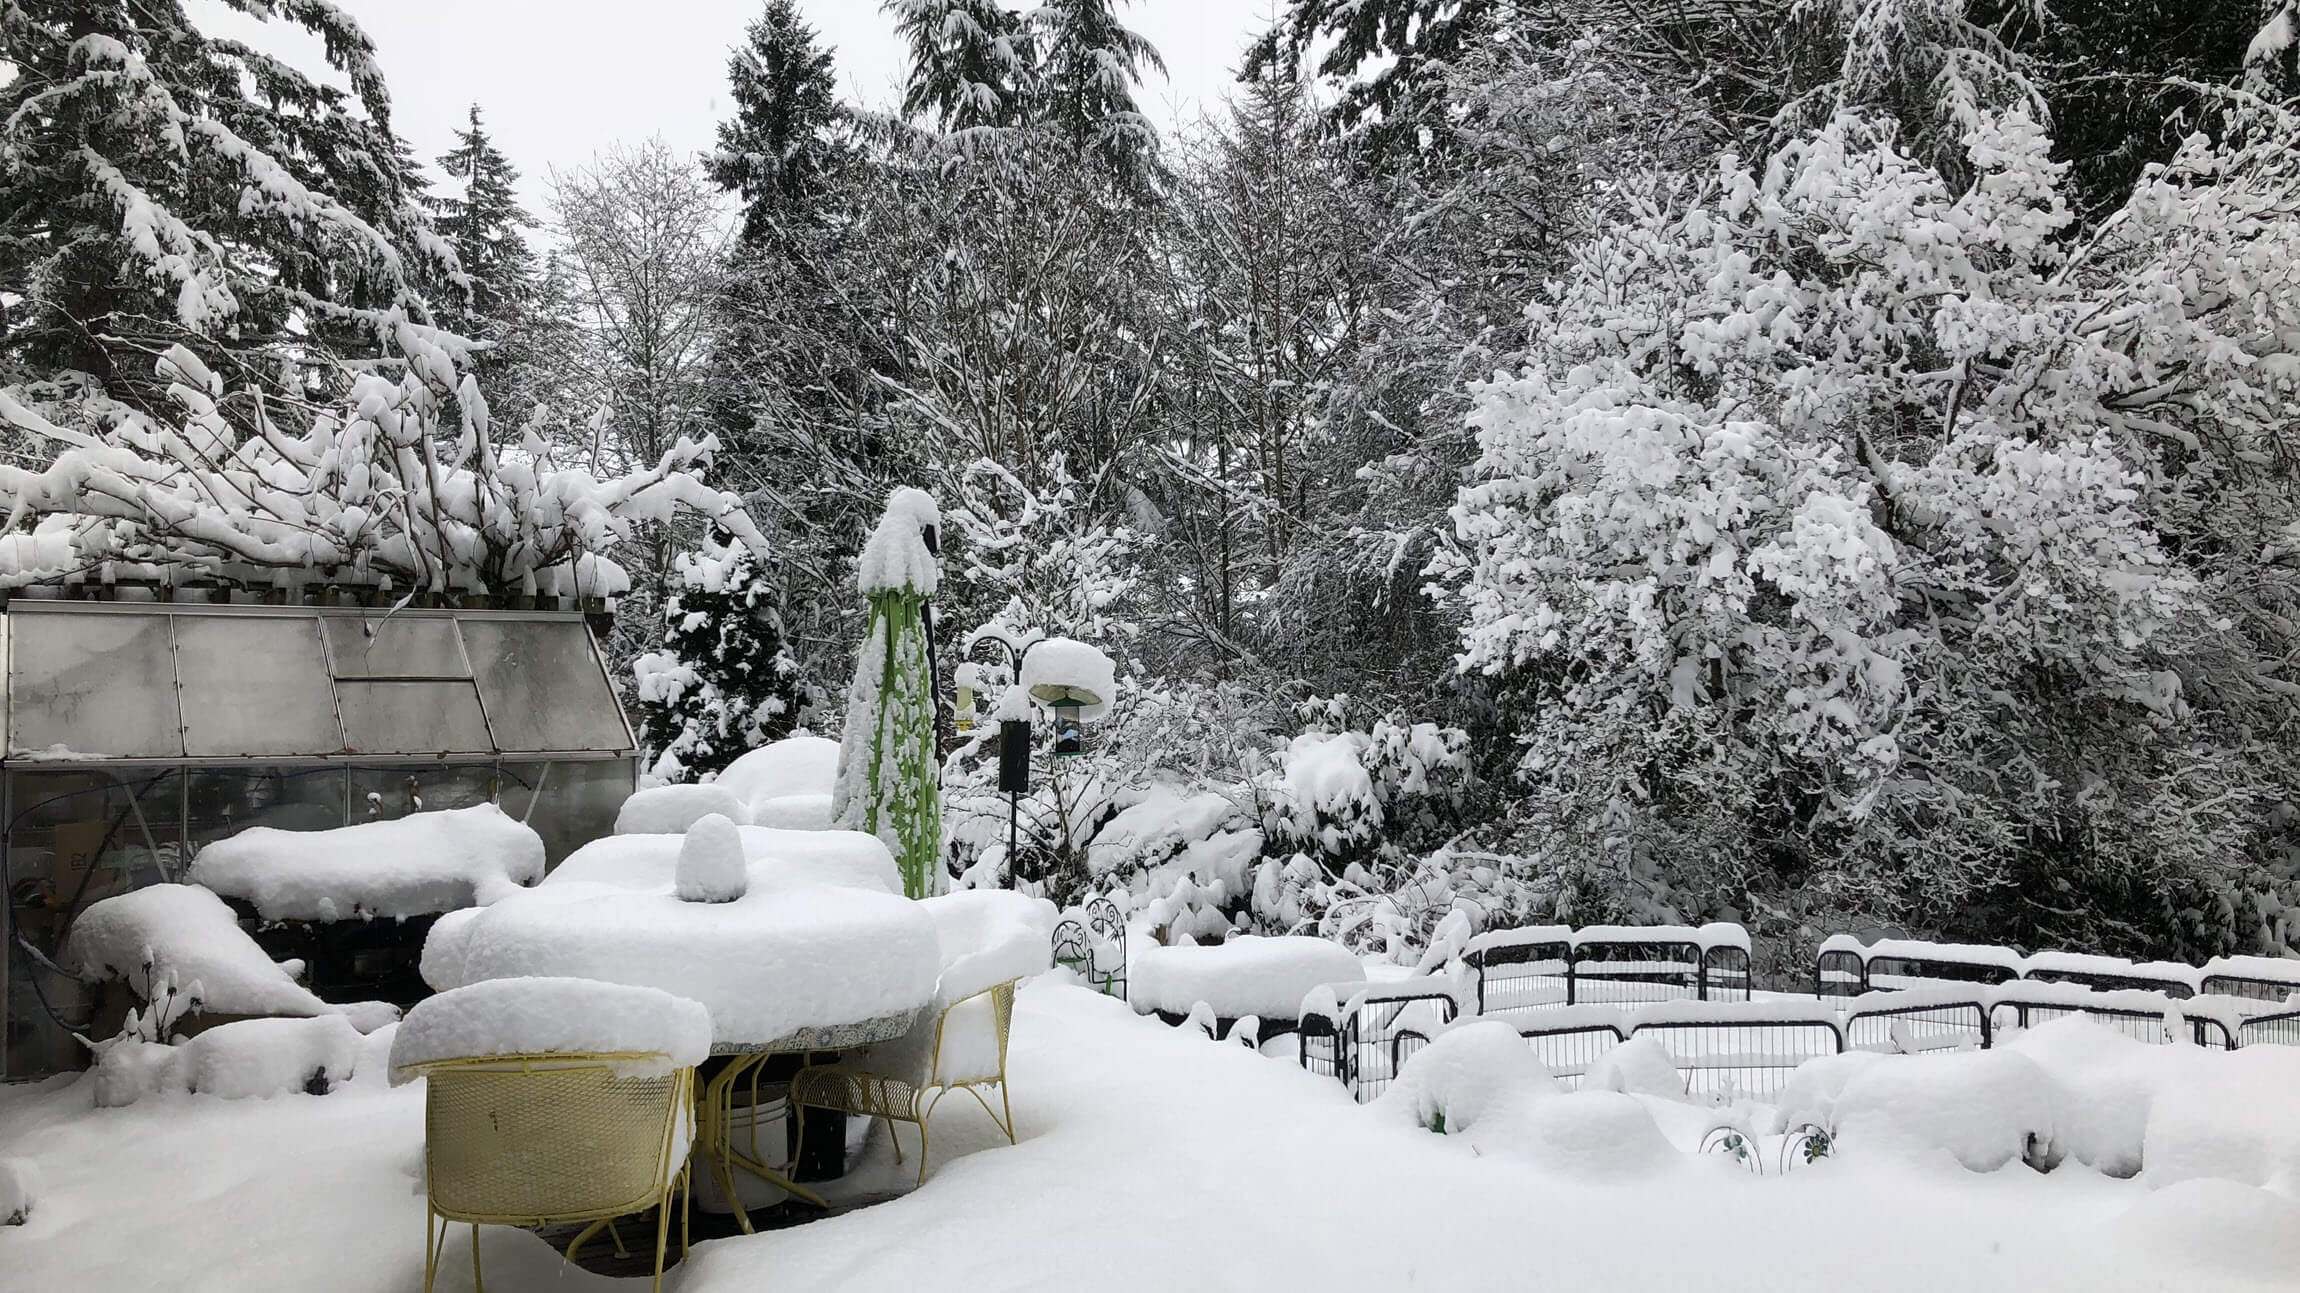 A snow-covered deck with a patio table and fence rail all buried by untouched snow at least one-foot deep. The background is filled with tall conifers all covered in heavy snow.